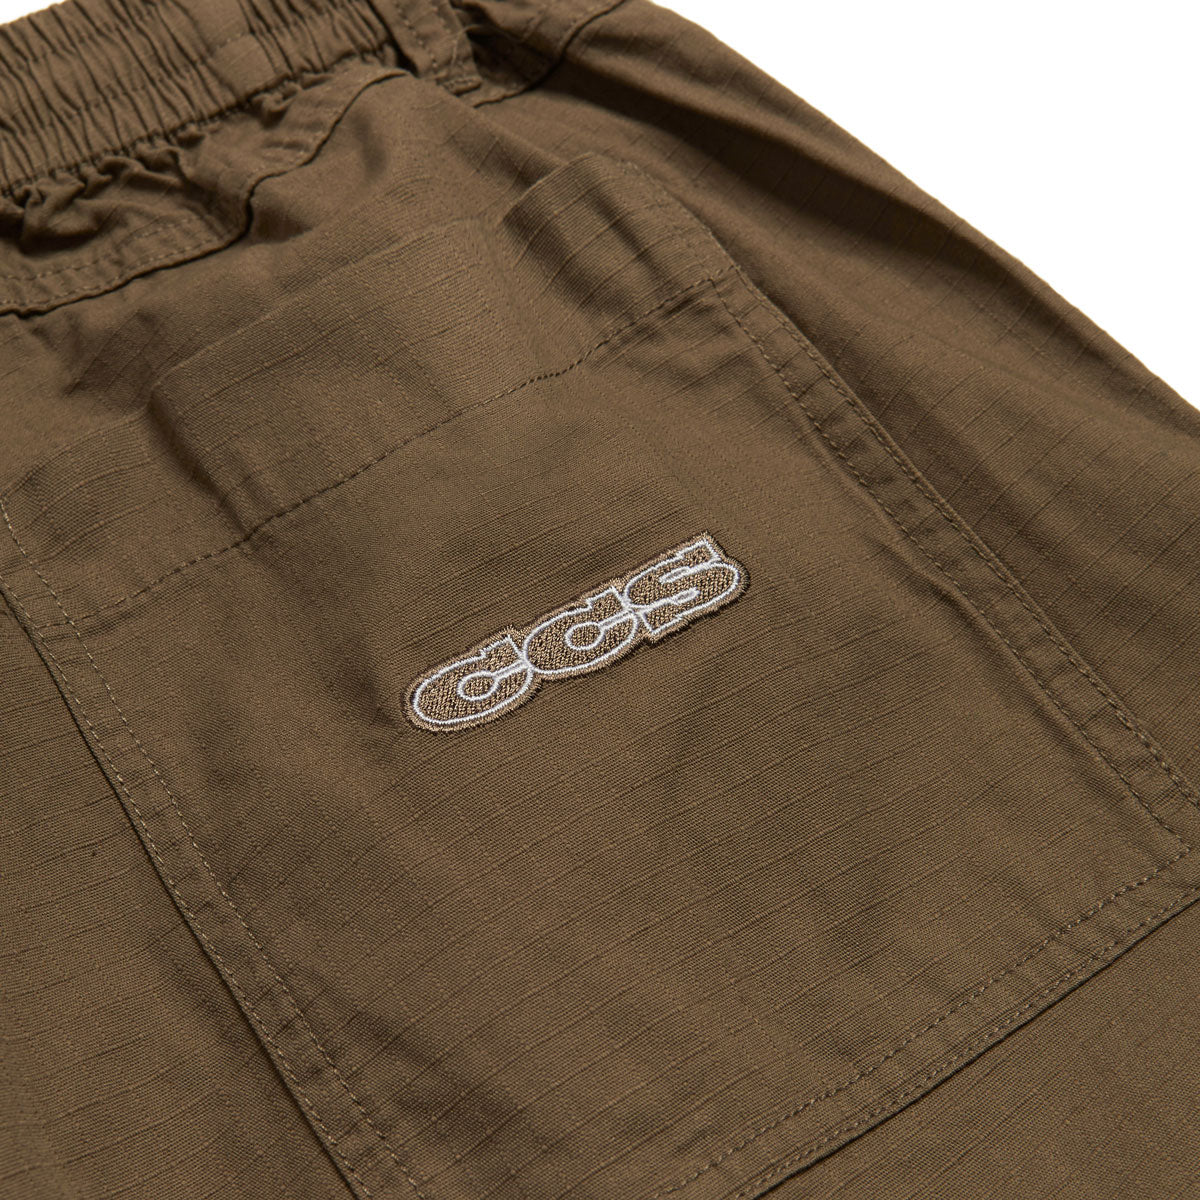 CCS Easy Ripstop Cargo Pants - Brown image 8